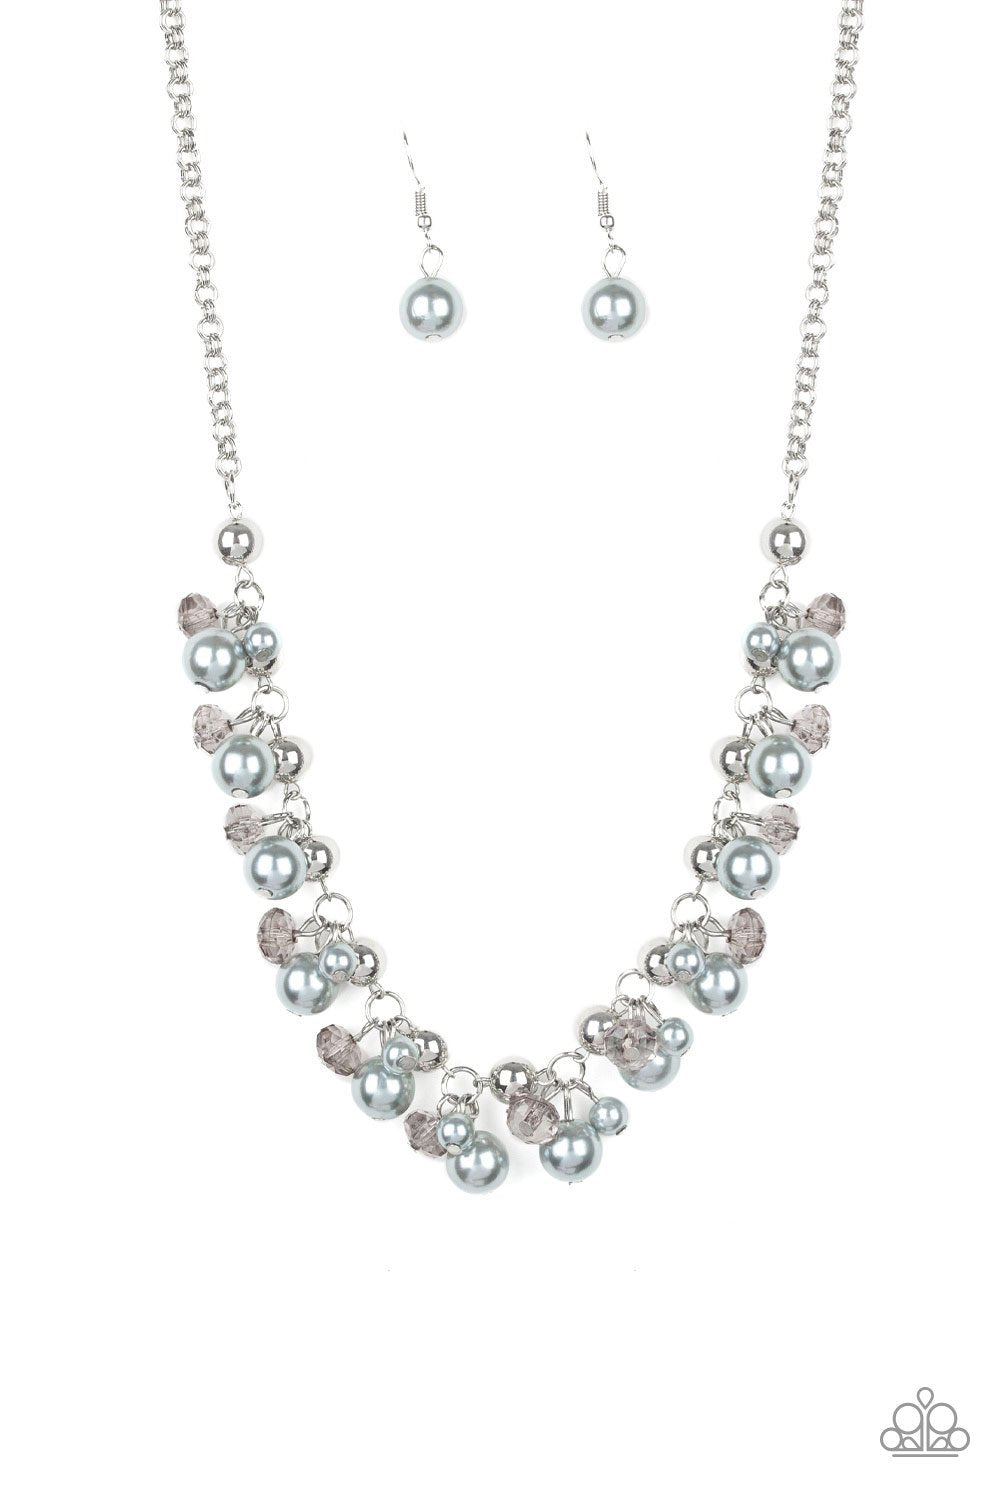 Paparazzi Duchess Royale - Silver Pearls - Necklace & Earrings - $5 Jewelry with Ashley Swint